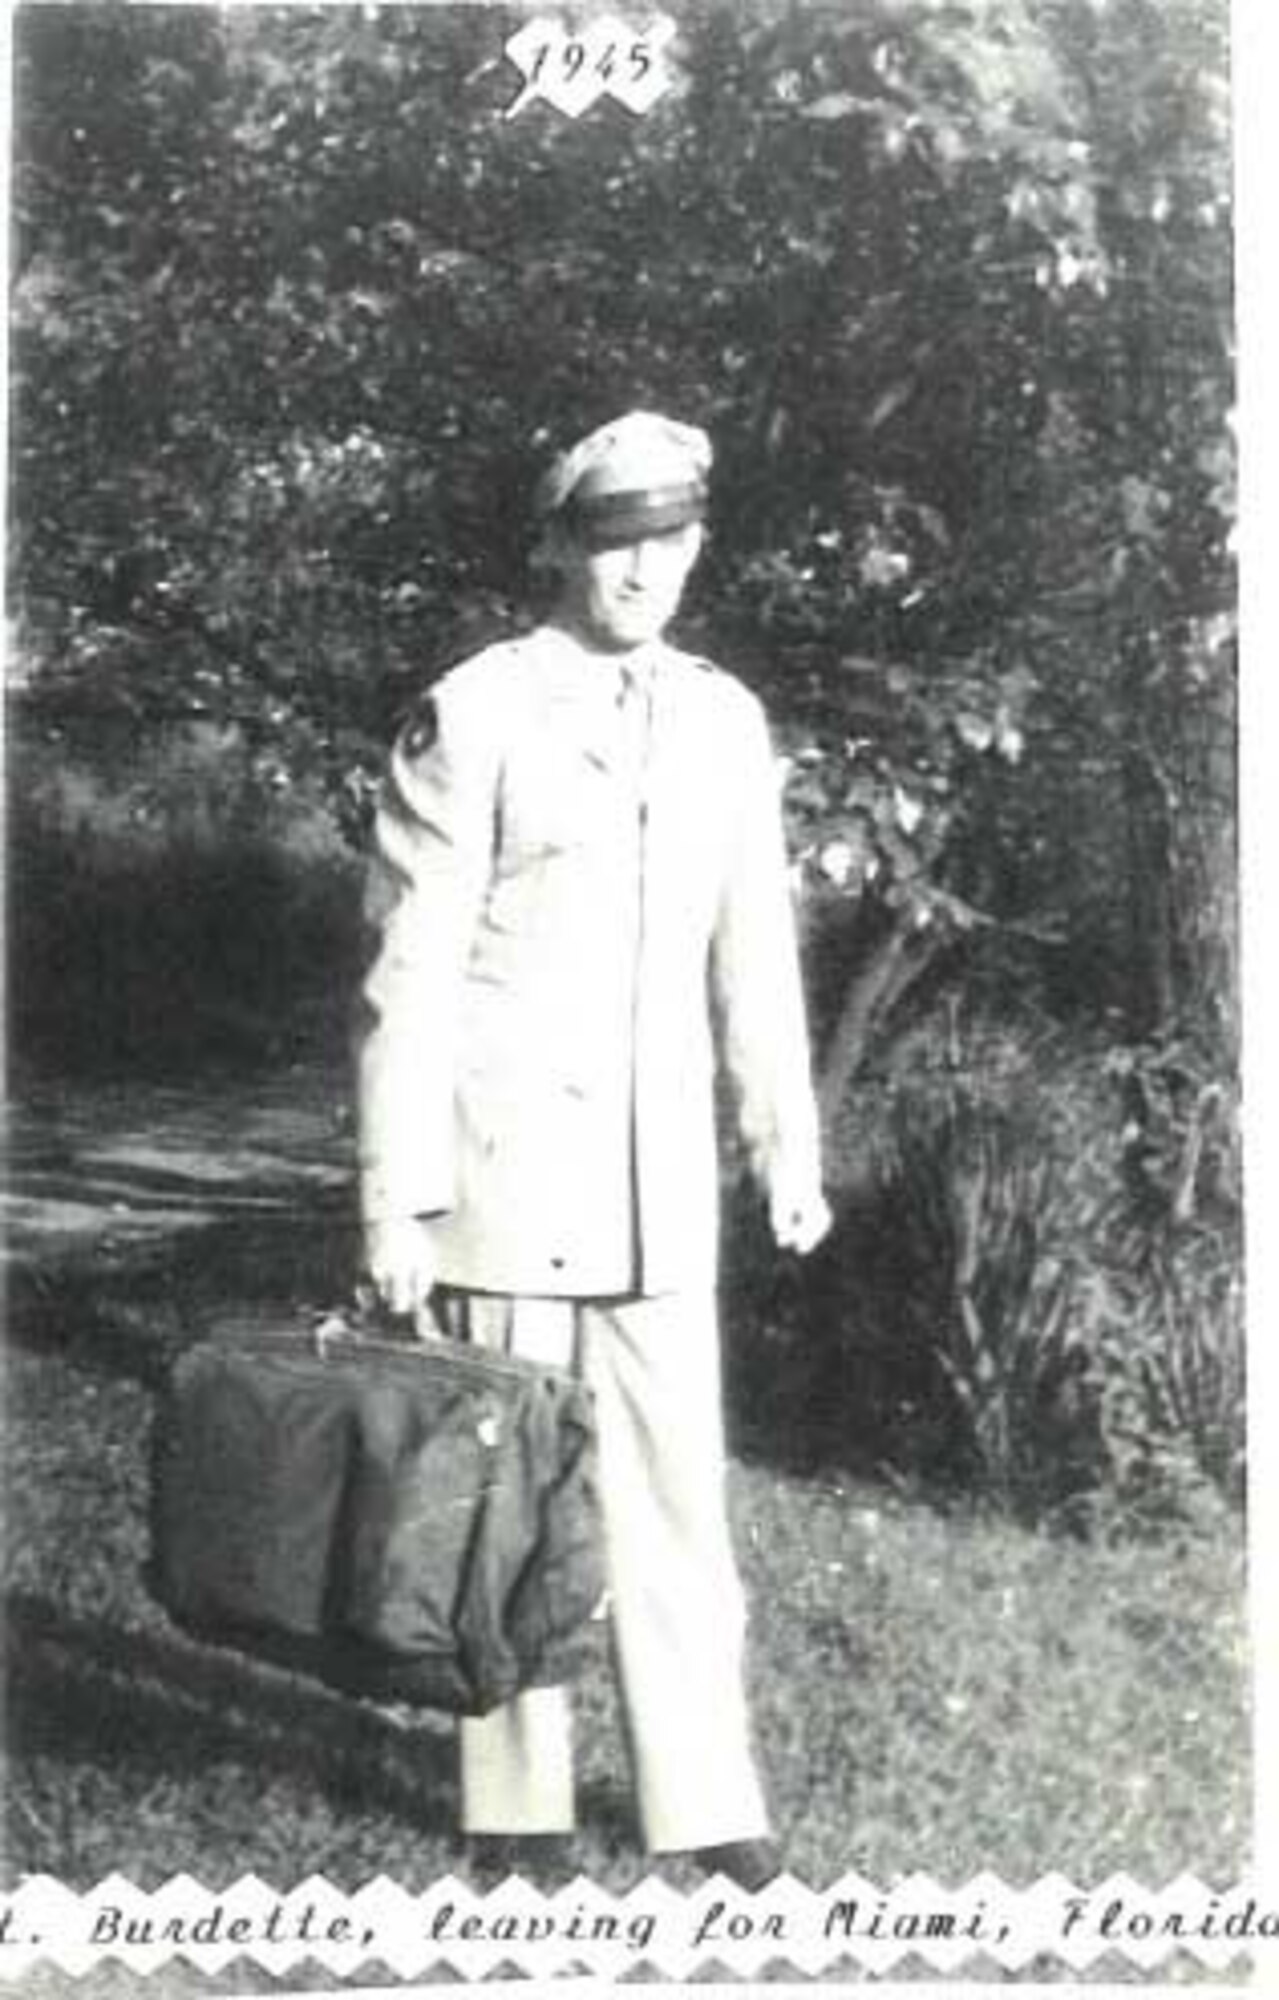 Suitcase in hand, 2nd Lt. Harry Burdette was enroute to Miami for mandatory leave given to prisoners of war. His grandson Capt. Shawn Jensen, a RC-135 Rivet Joint pilot with the 763rd Reconnaissance Wing, refers to his grandfather's diary when he needs a reminder of the sacrifices his grandfather made in captivityas a prisoner of war for 18 months in Nazi Germany. (Courtesy photo/Richard Burdette/Released)